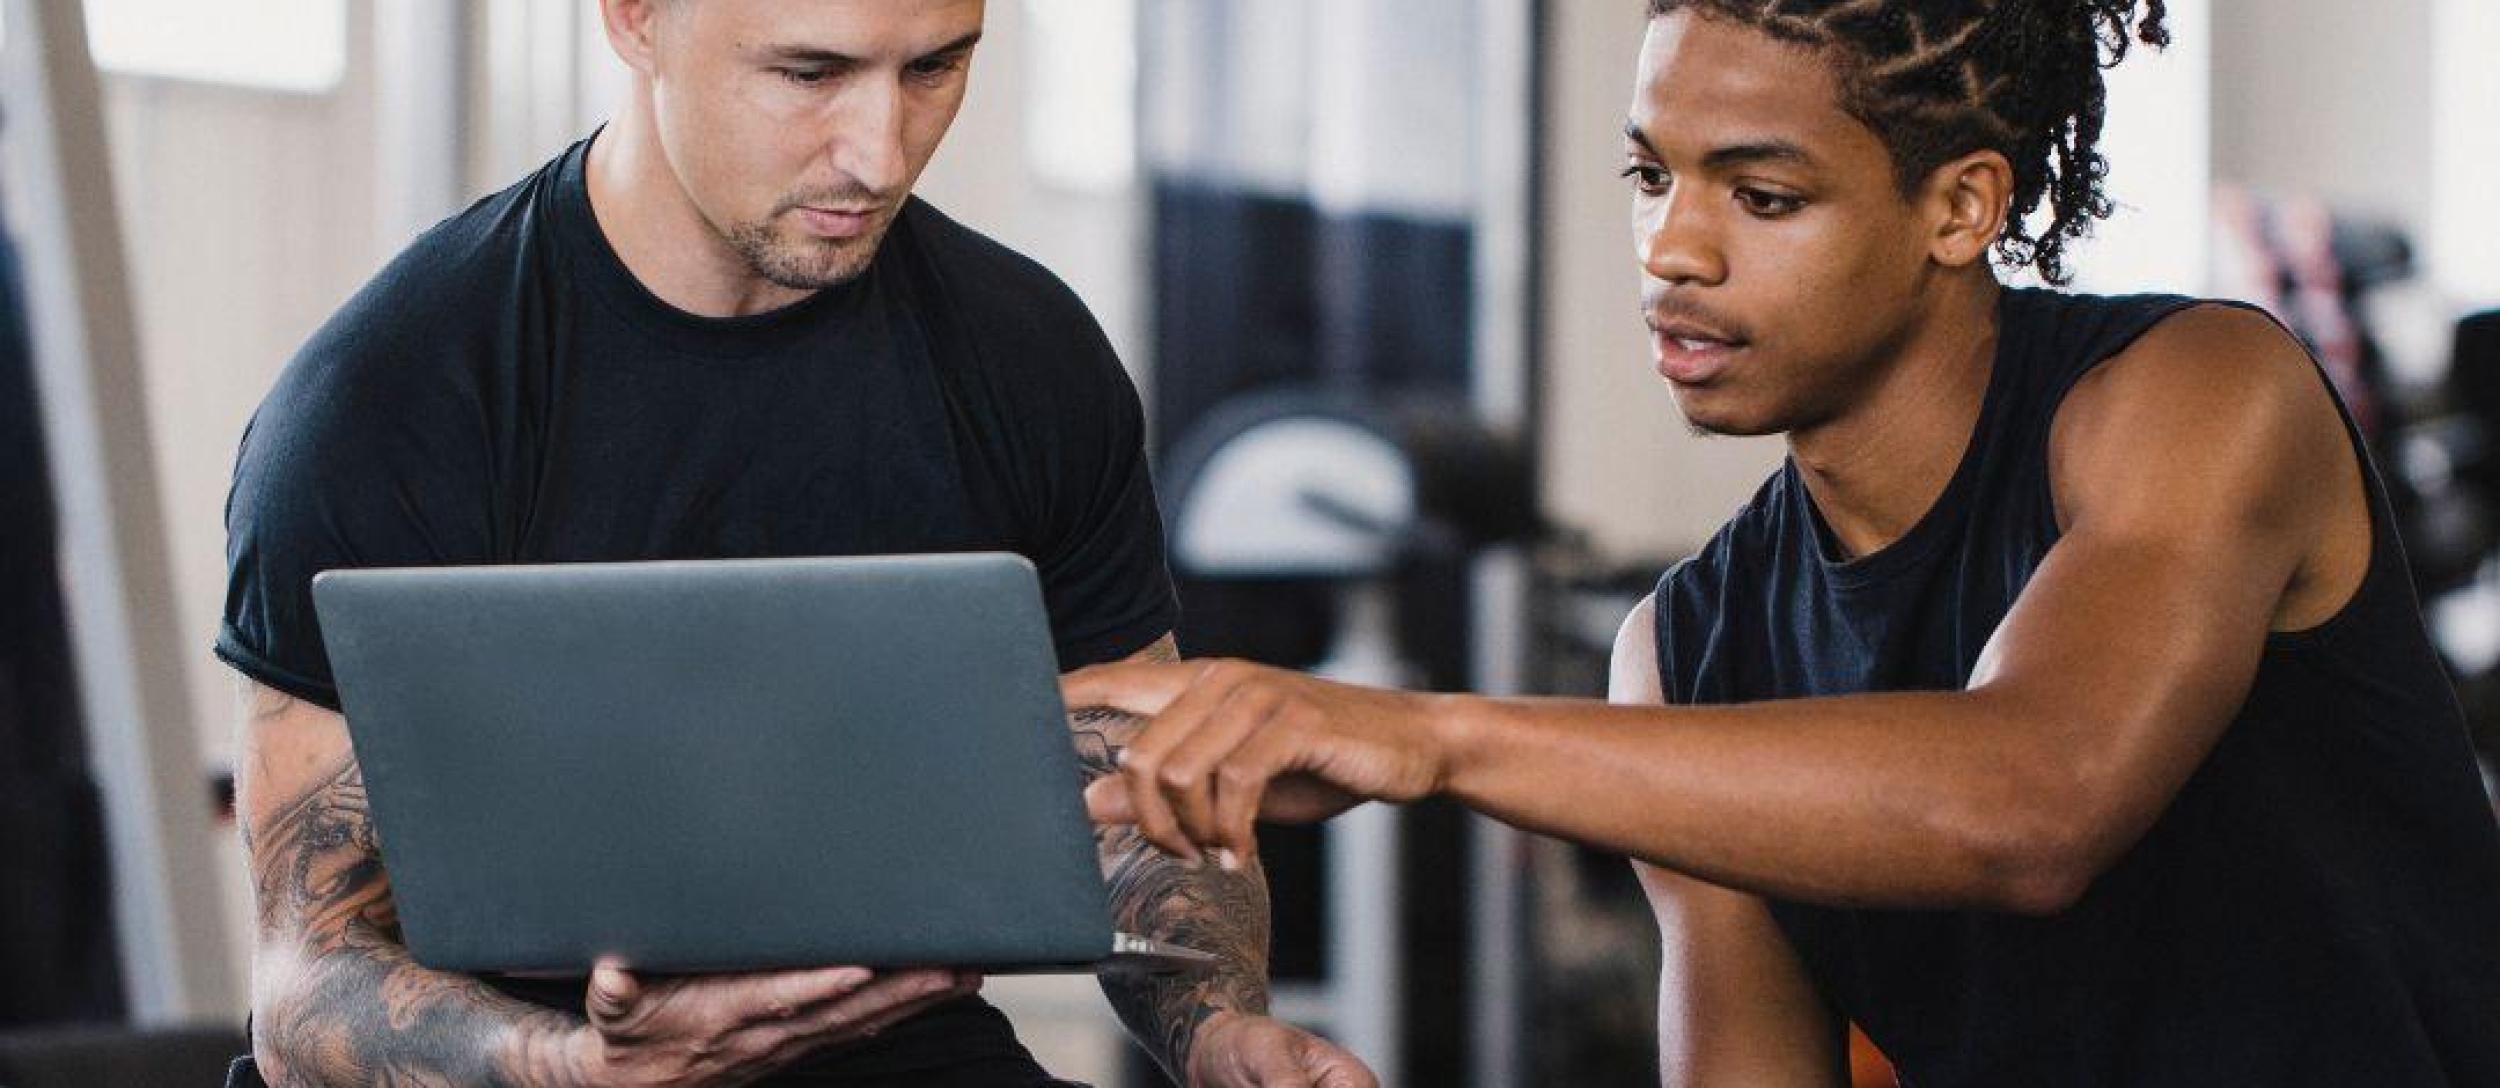 Personal Training Consultations: 3 Things You Must Get From Your Client